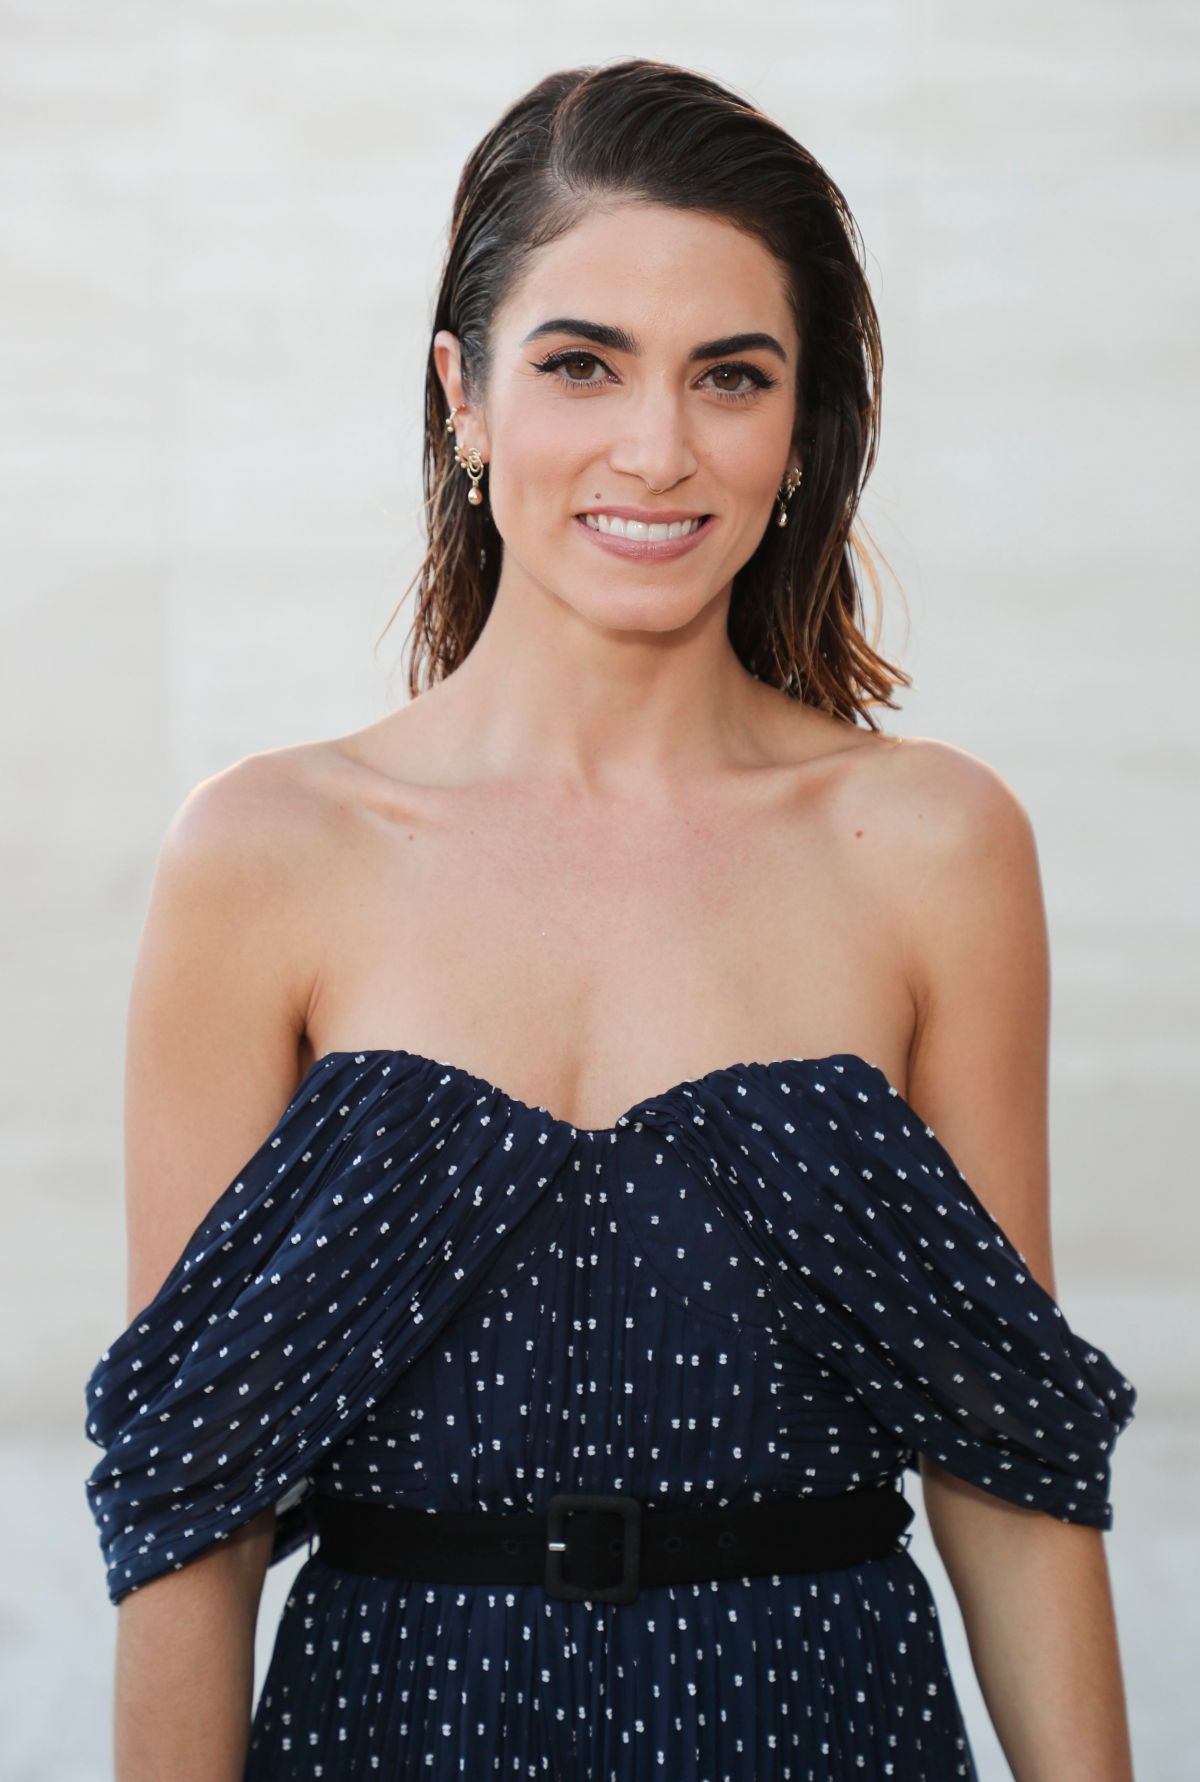 NIKKI REED at Women in Conservation Event in Los Angeles 06/08/2019 ...